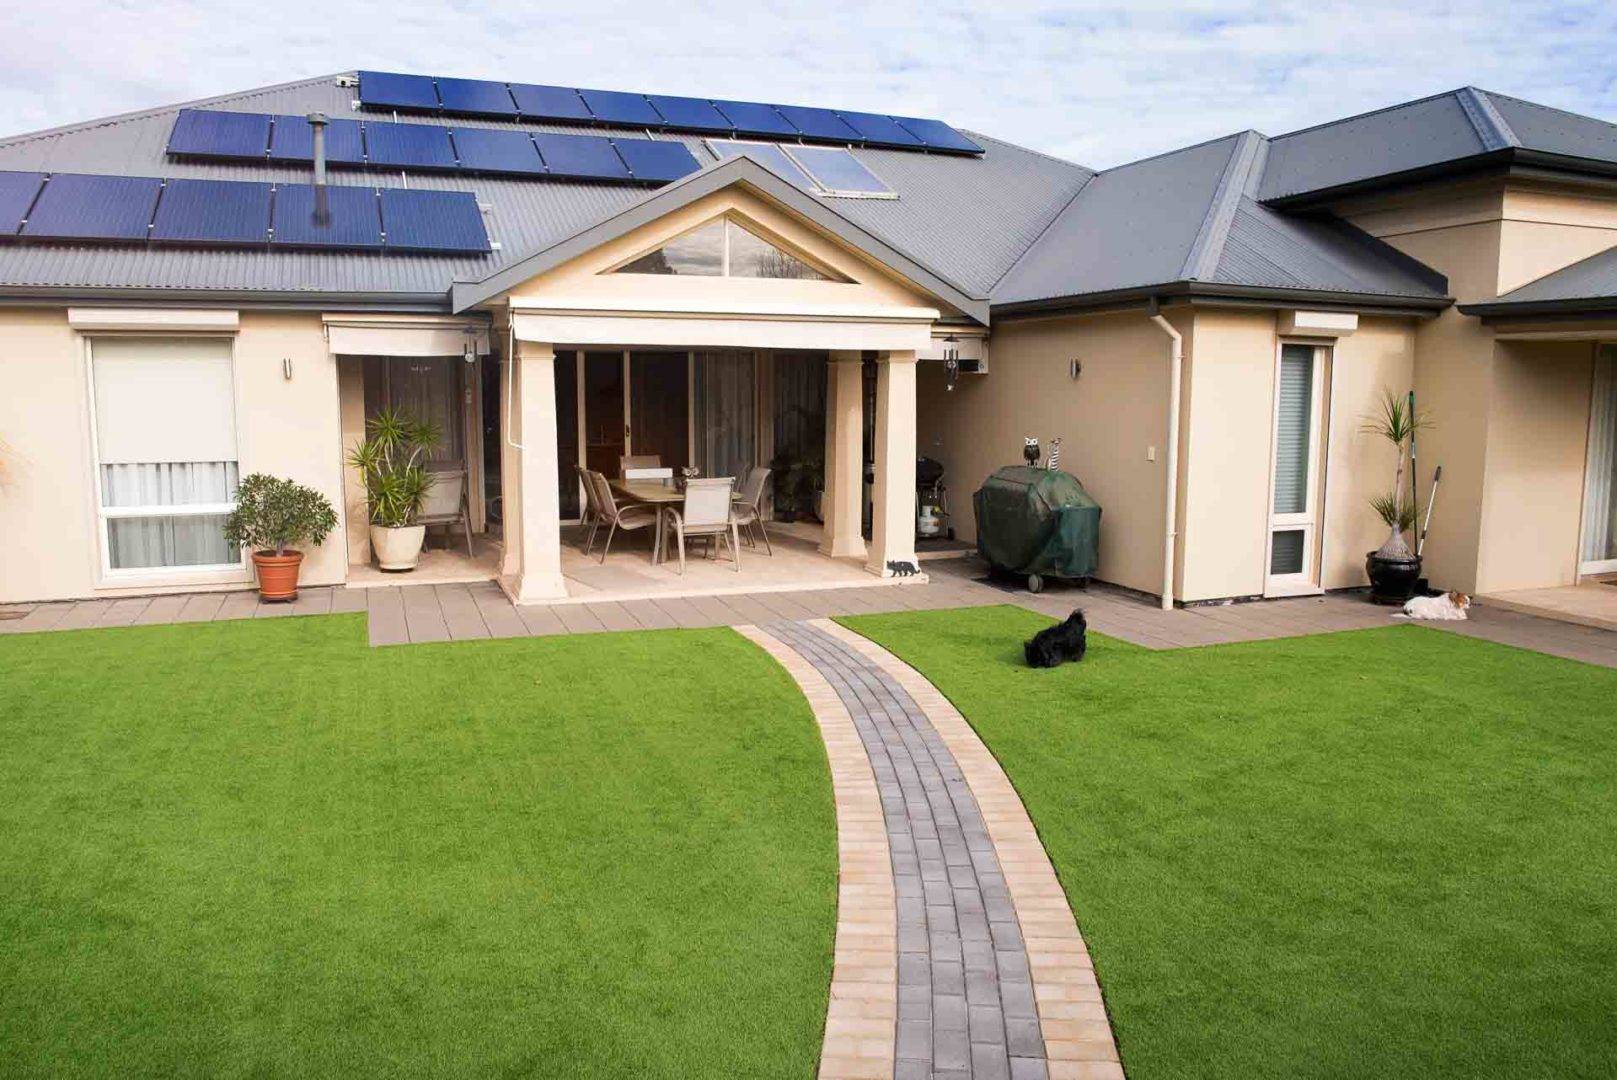 5 Tips on How to Maintain a Clean and Tidy Artificial Grass Lawn - Avoid using corrosive chemicals near your lawn, Australian Outdoor Living.